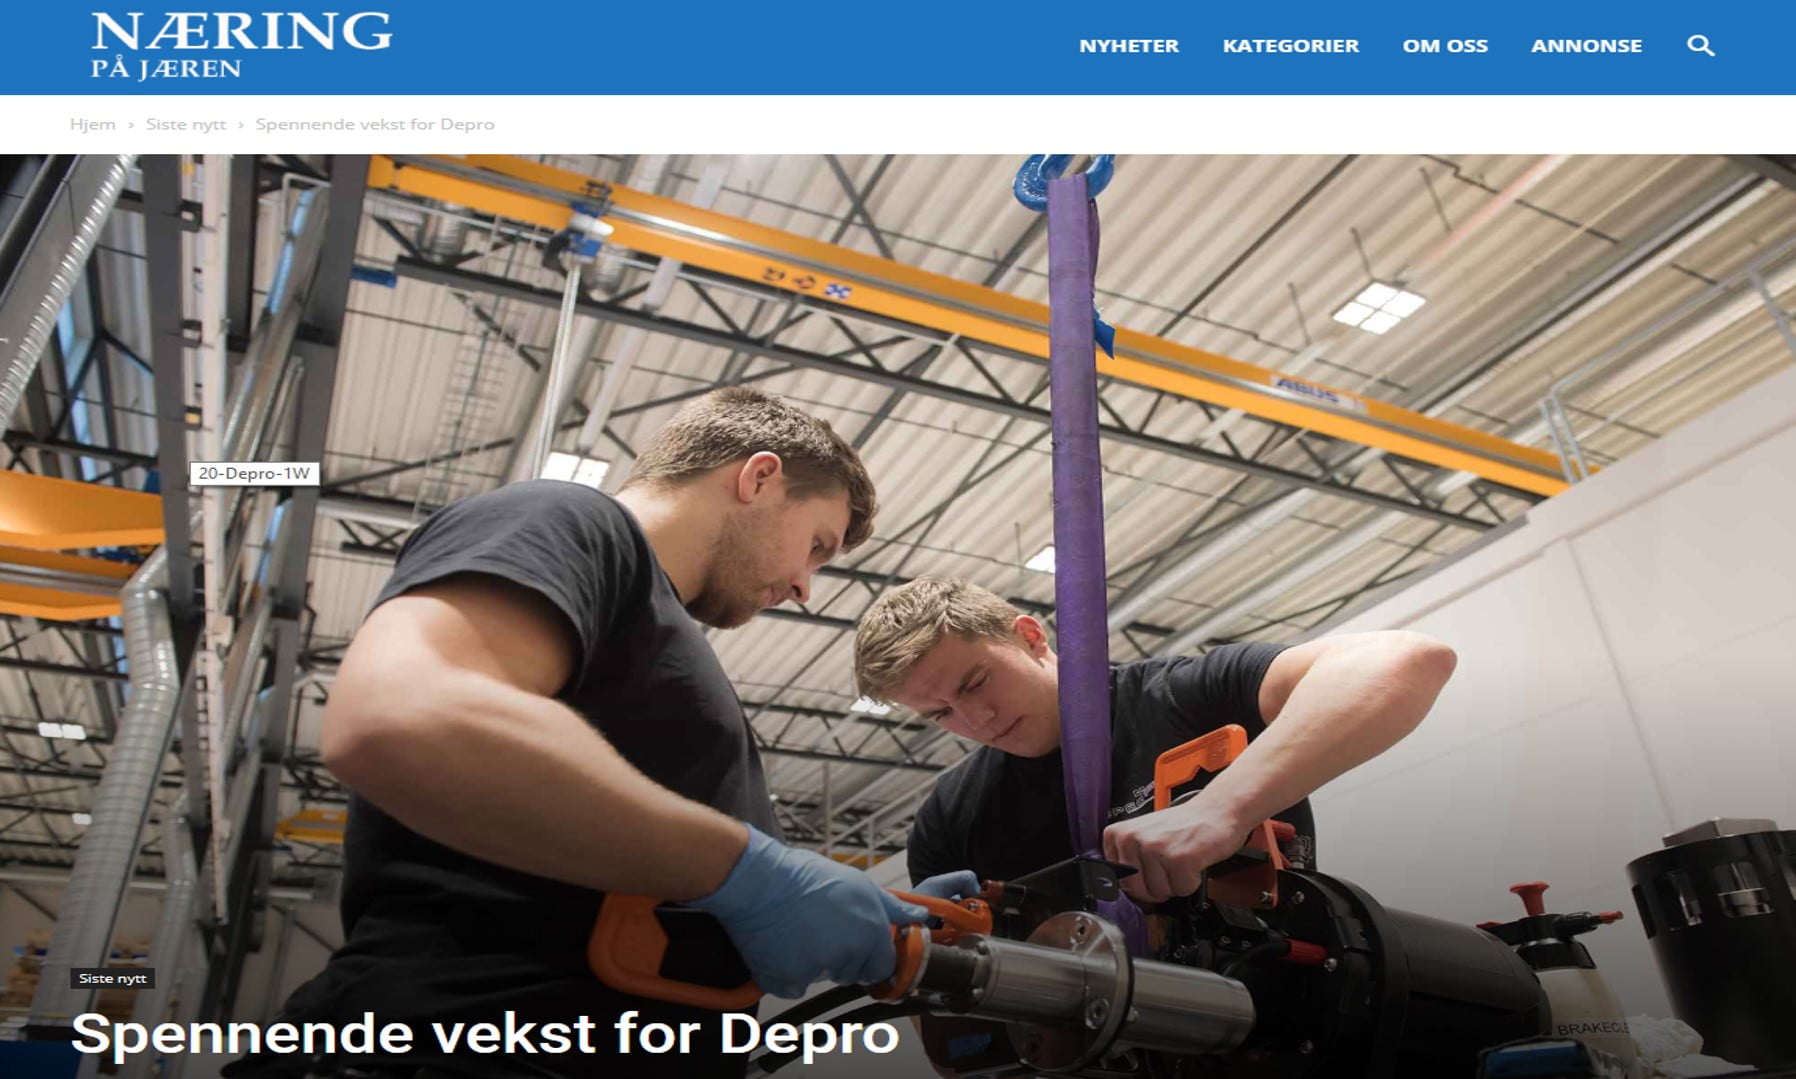 Article about the Depro success